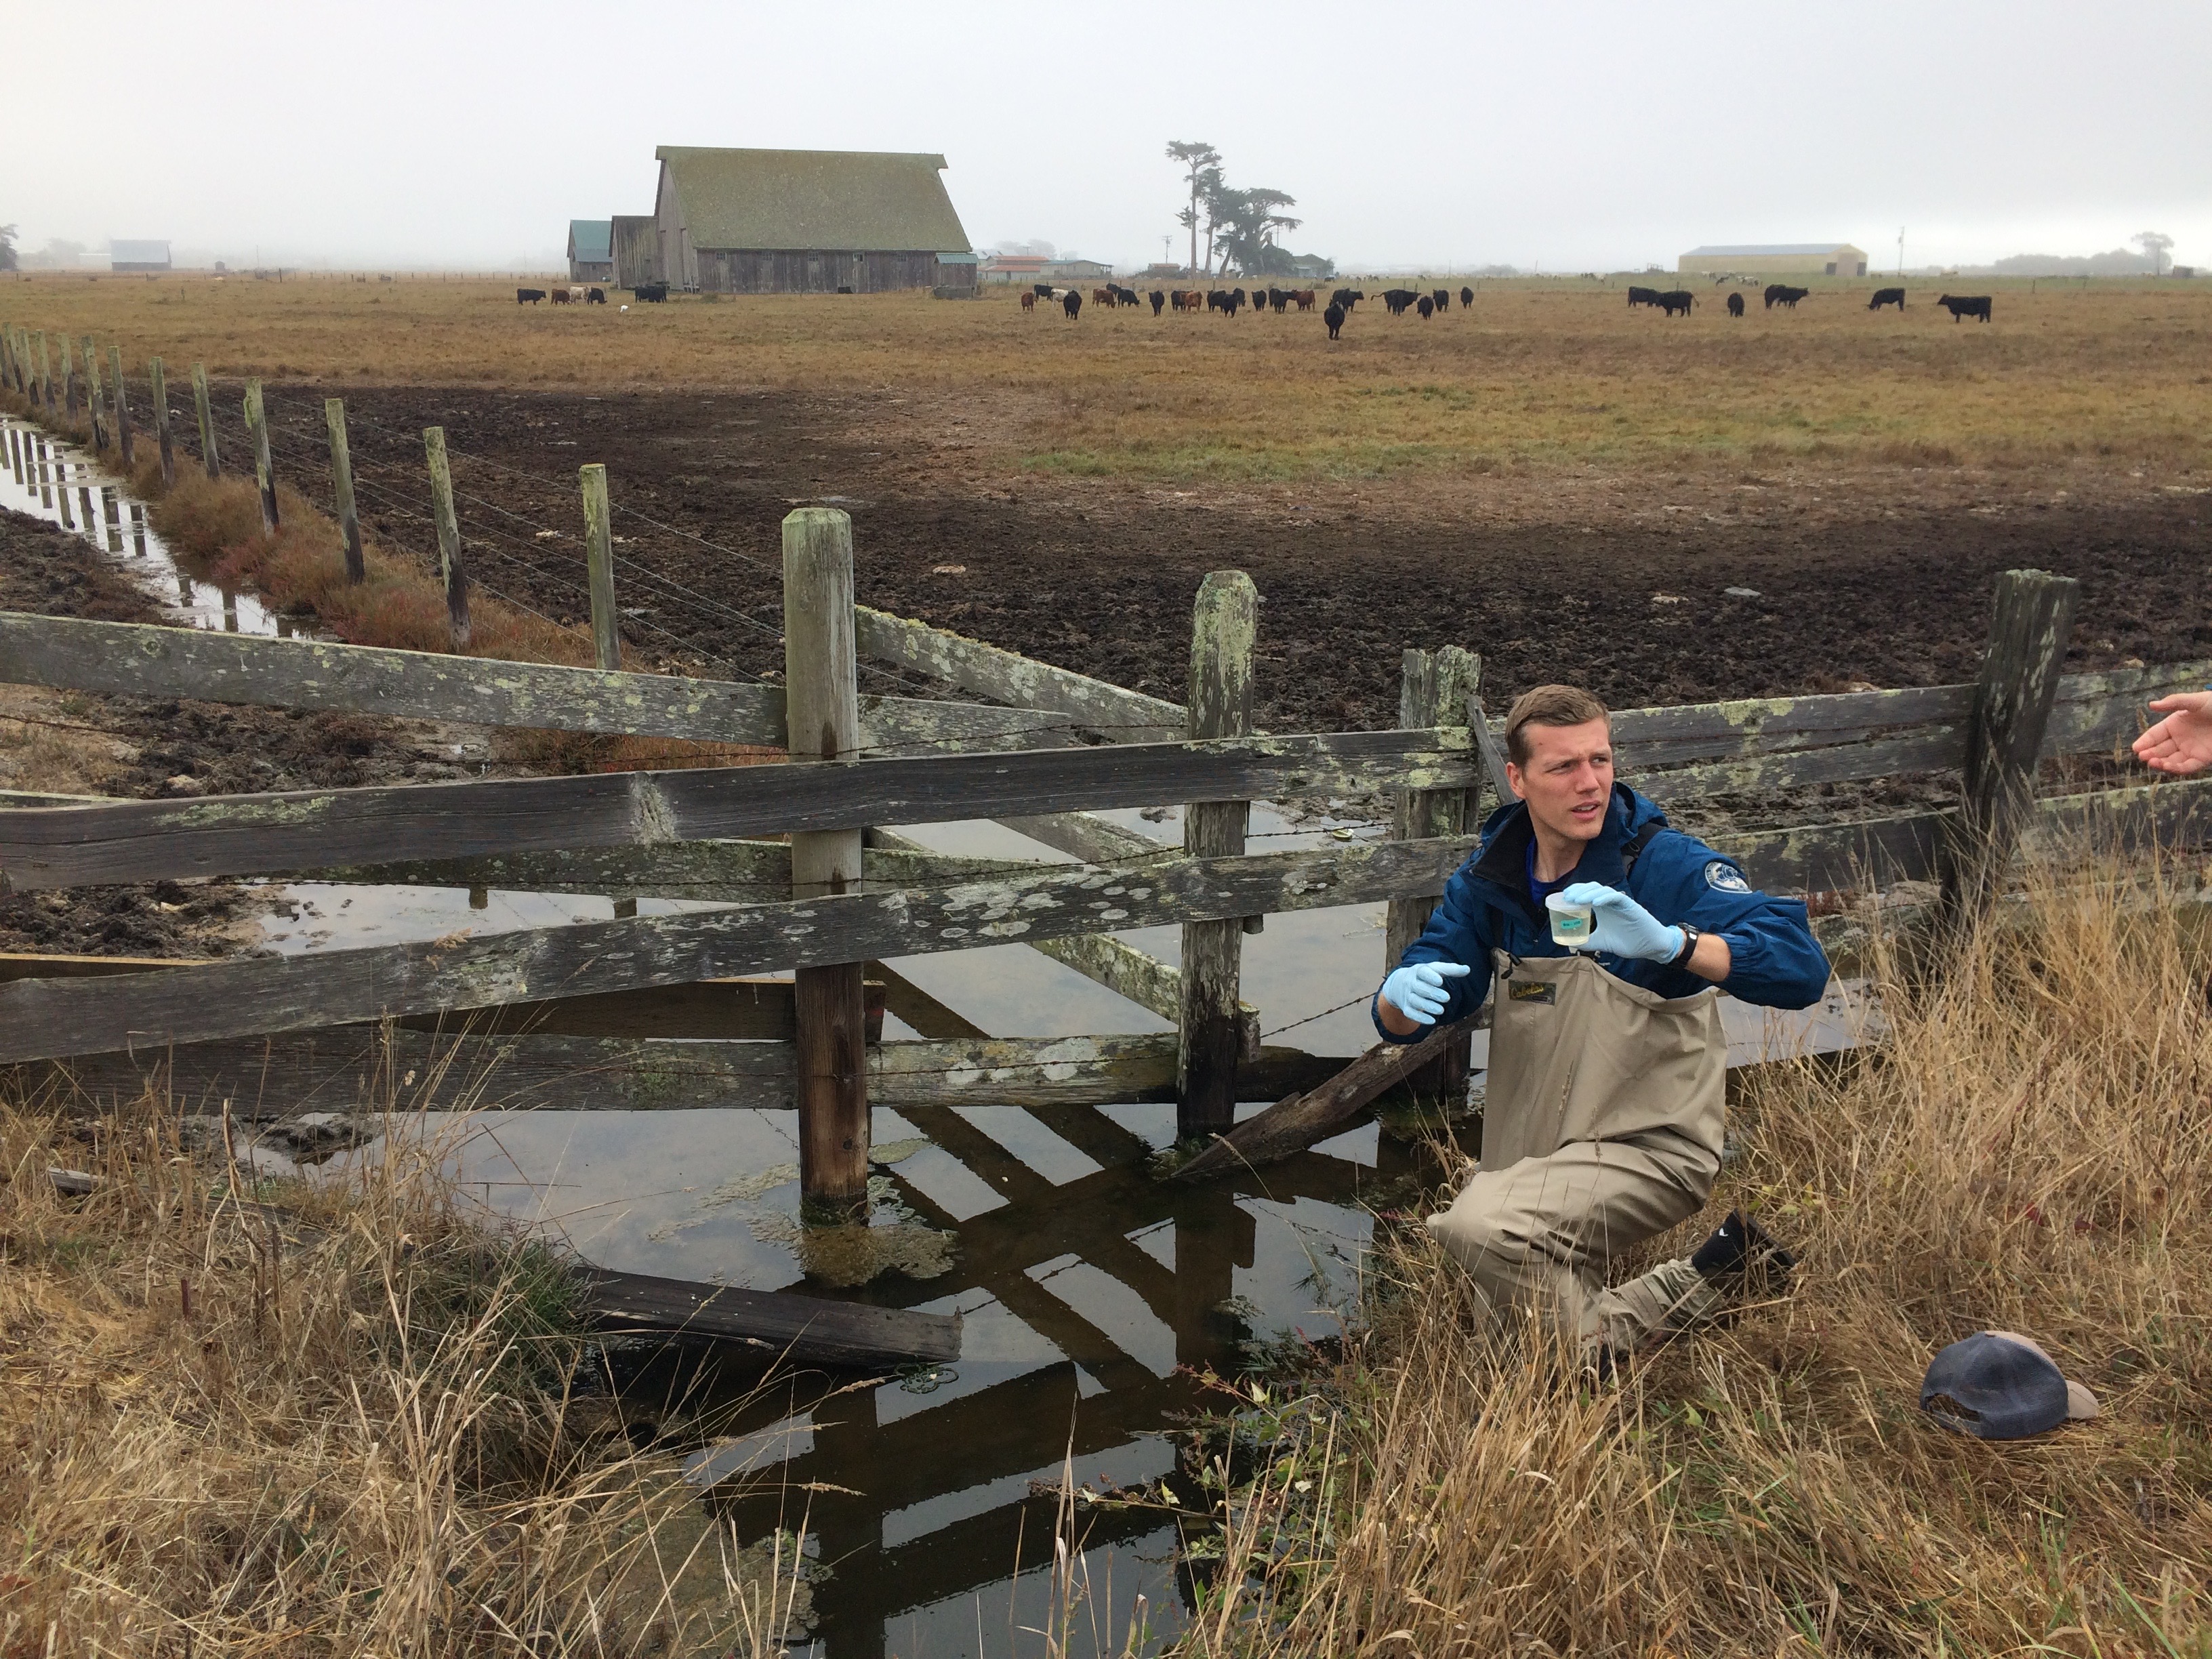 member of the Watershed Stewardship Program, collecting water samples for fecal indicator bacteria analysis from cattle pasture runoff